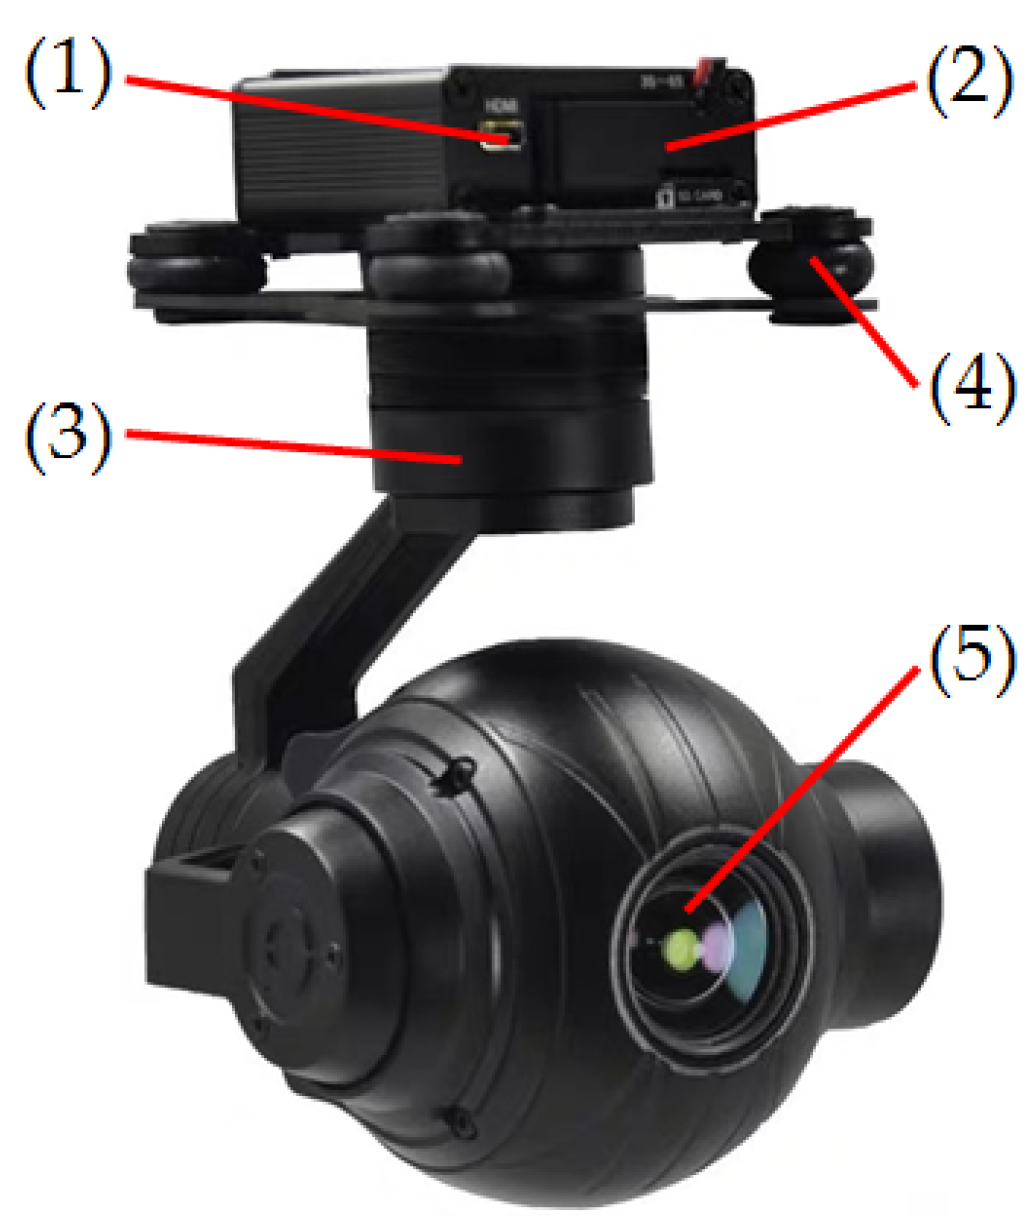 Applied Sciences | Free Full-Text | Real-Time Visual Tracking of Moving  Targets Using a Low-Cost Unmanned Aerial Vehicle with a 3-Axis Stabilized  Gimbal System